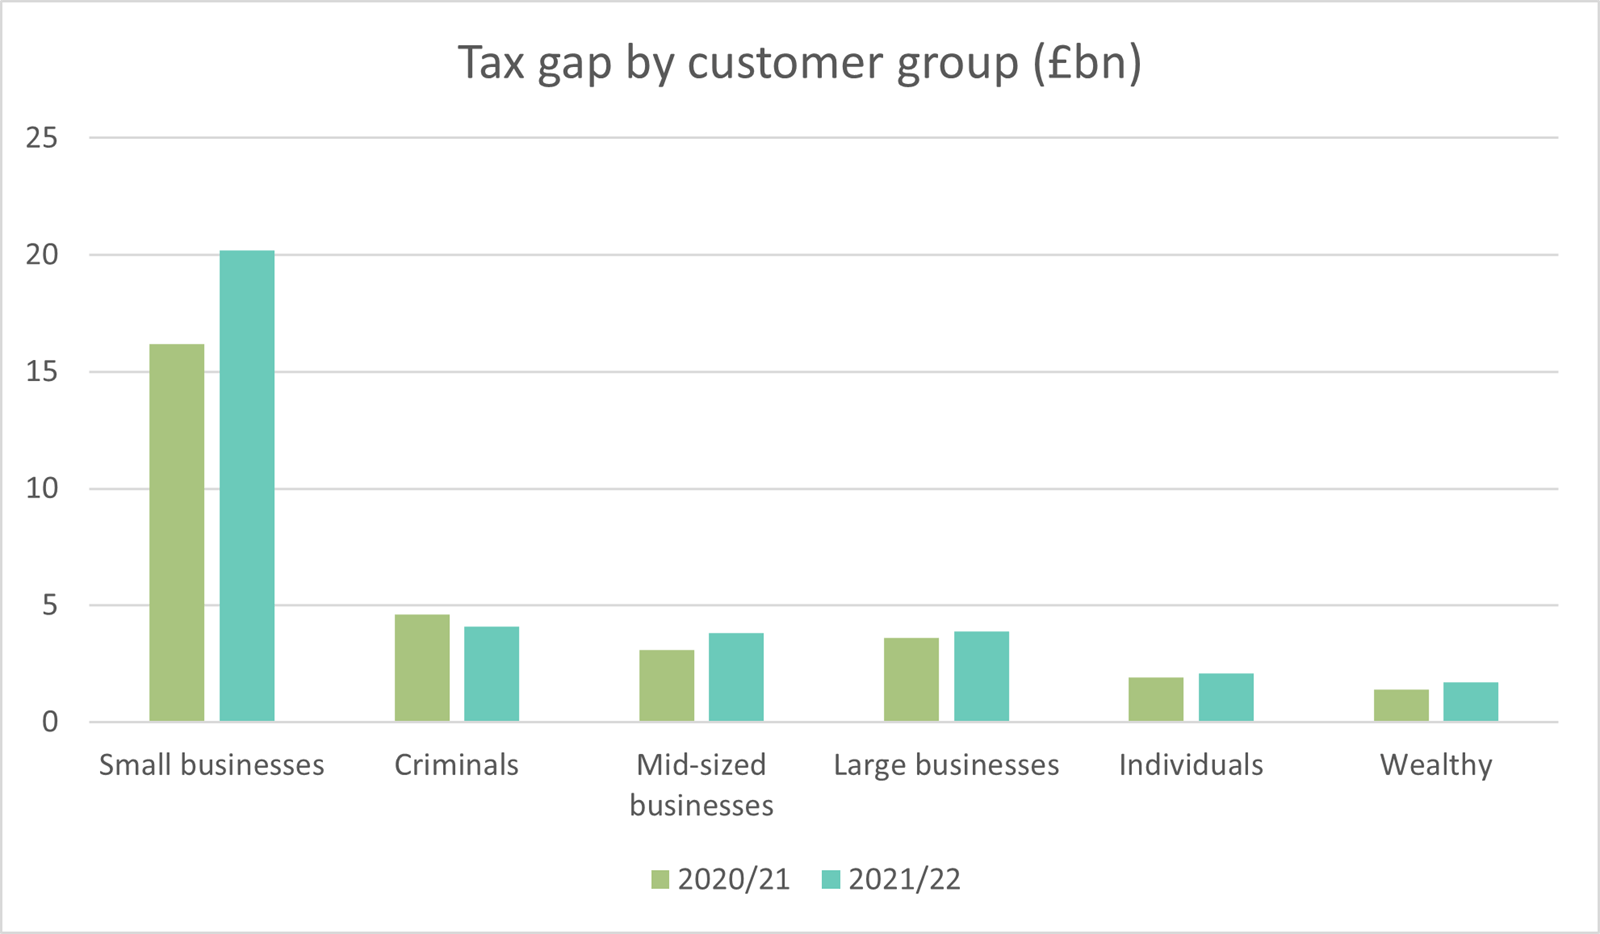 Table showing the tax gap comparison for 2020/21 to 2021/2022 by customer group according to HMRC data.